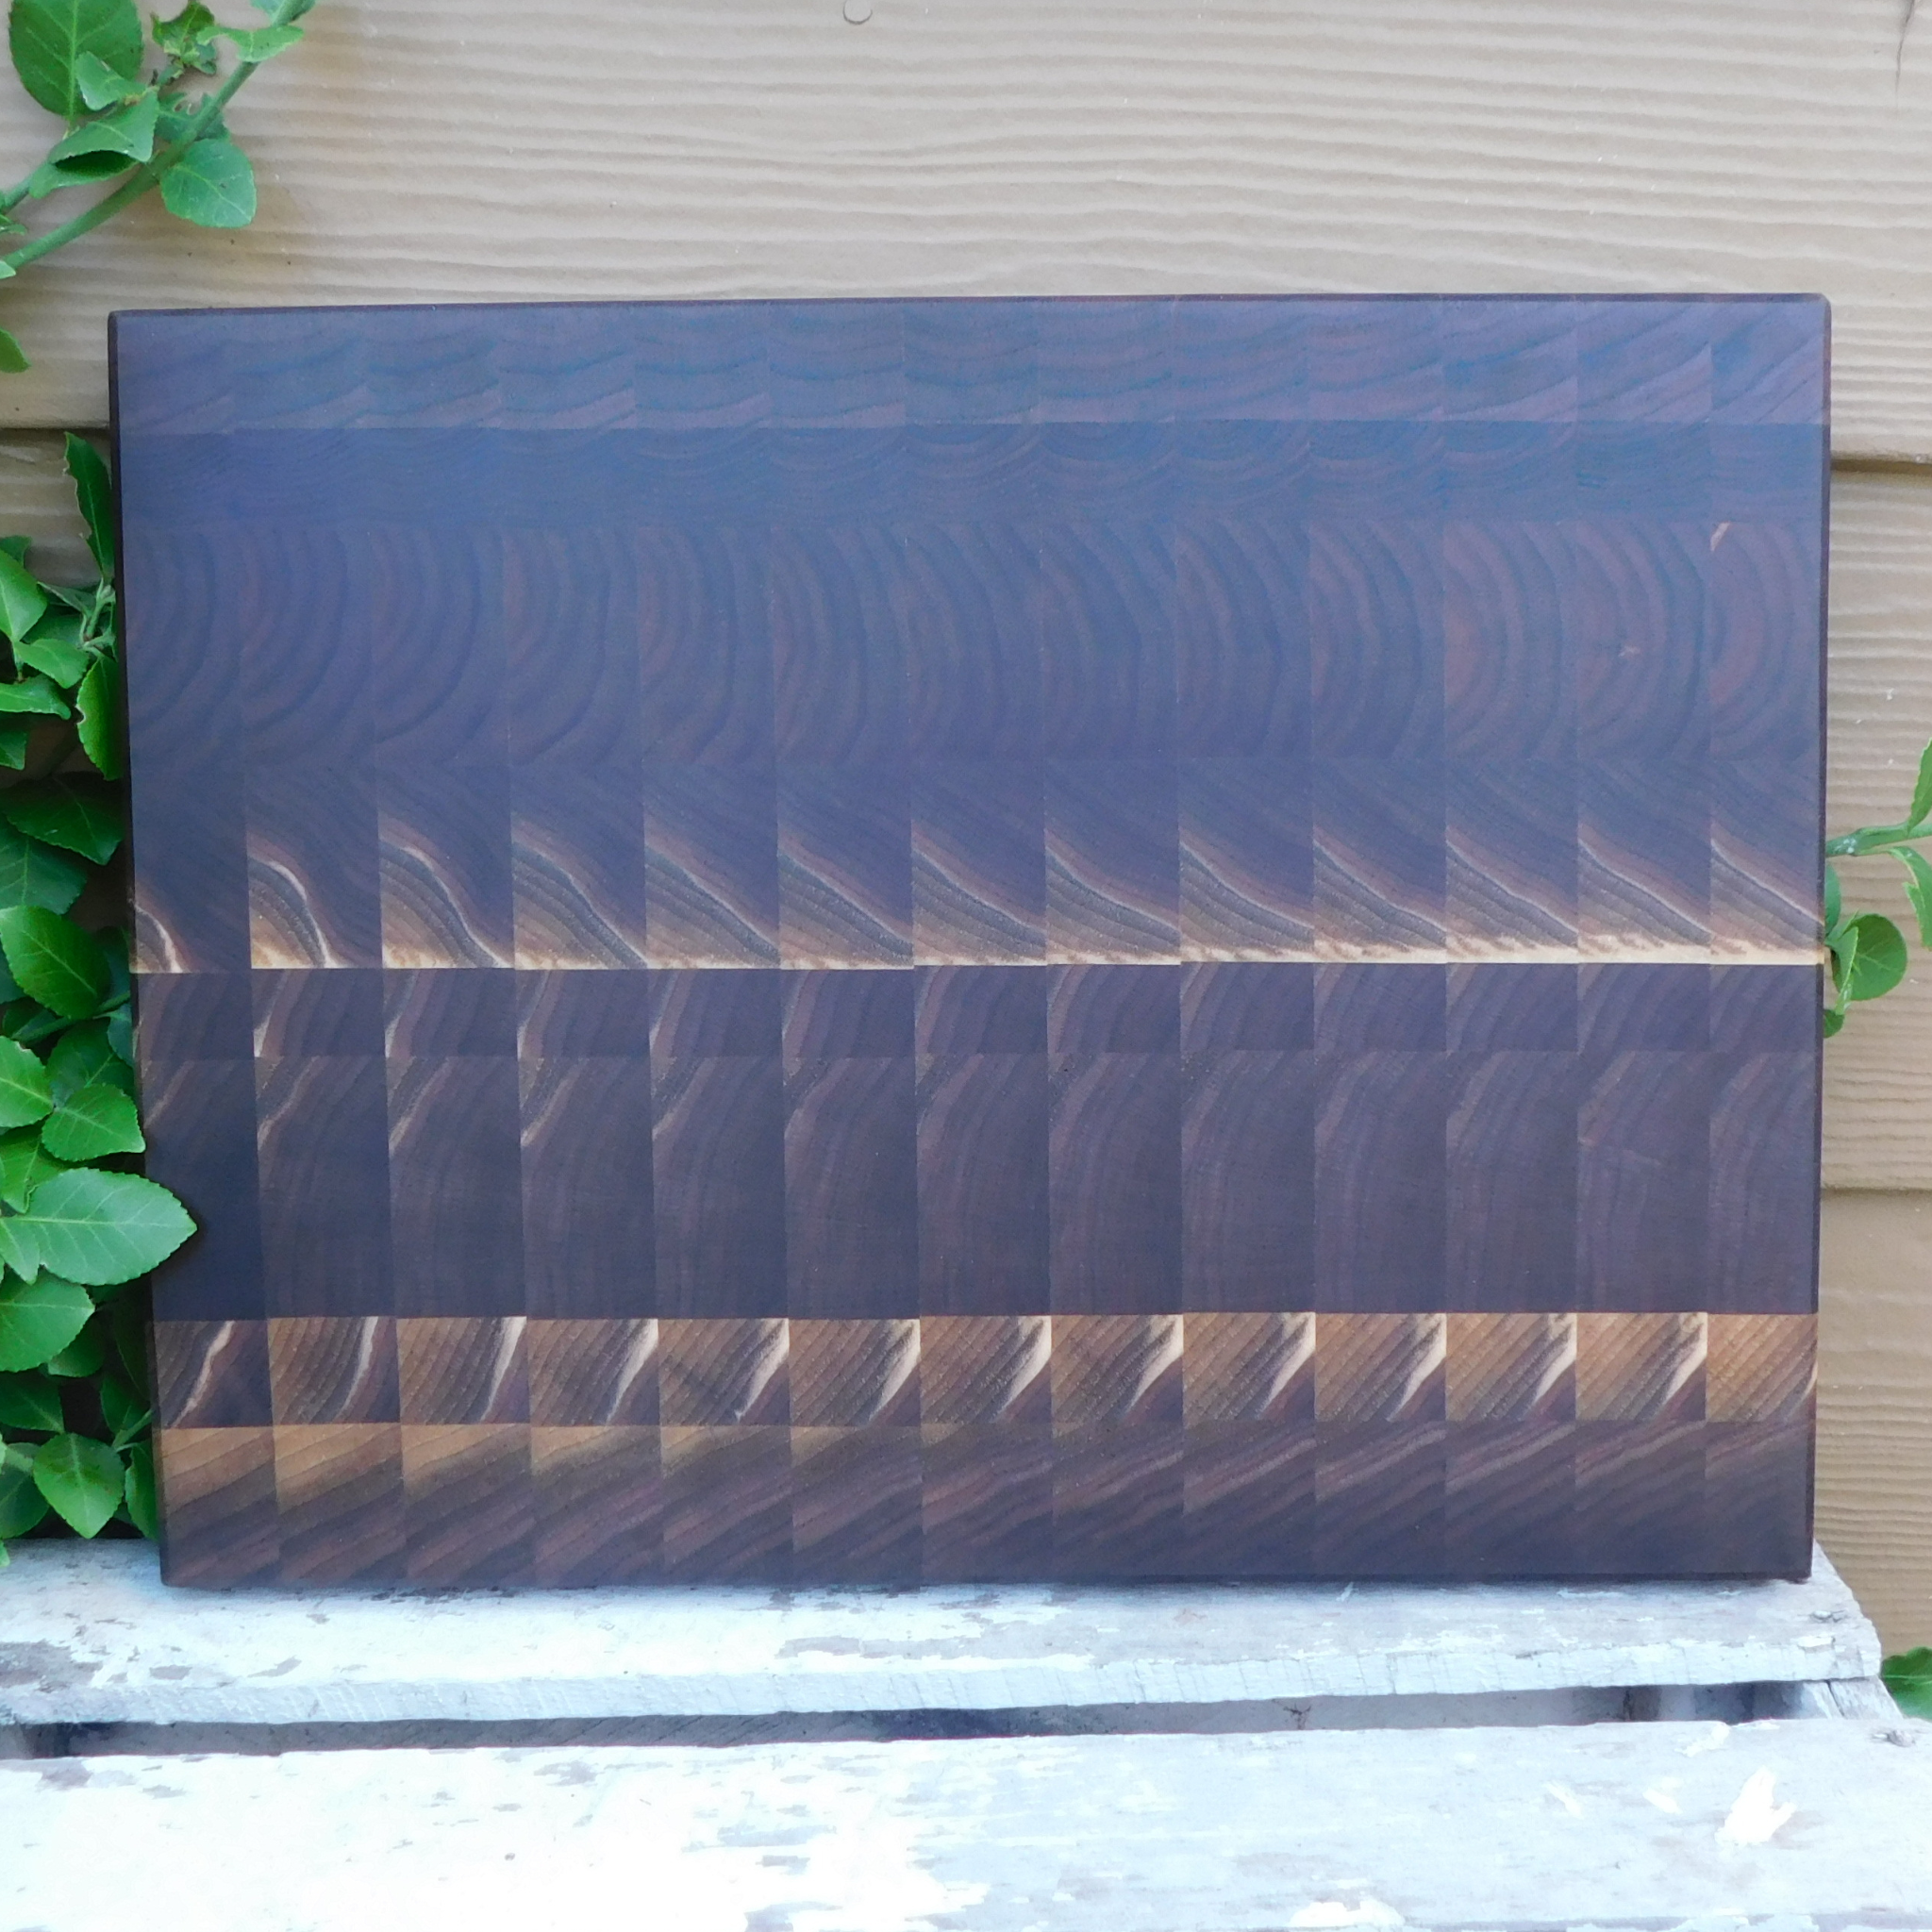 Black Walnut End Grain Cutting Board with Hand Grooves and Clear Rubber Grip Feet